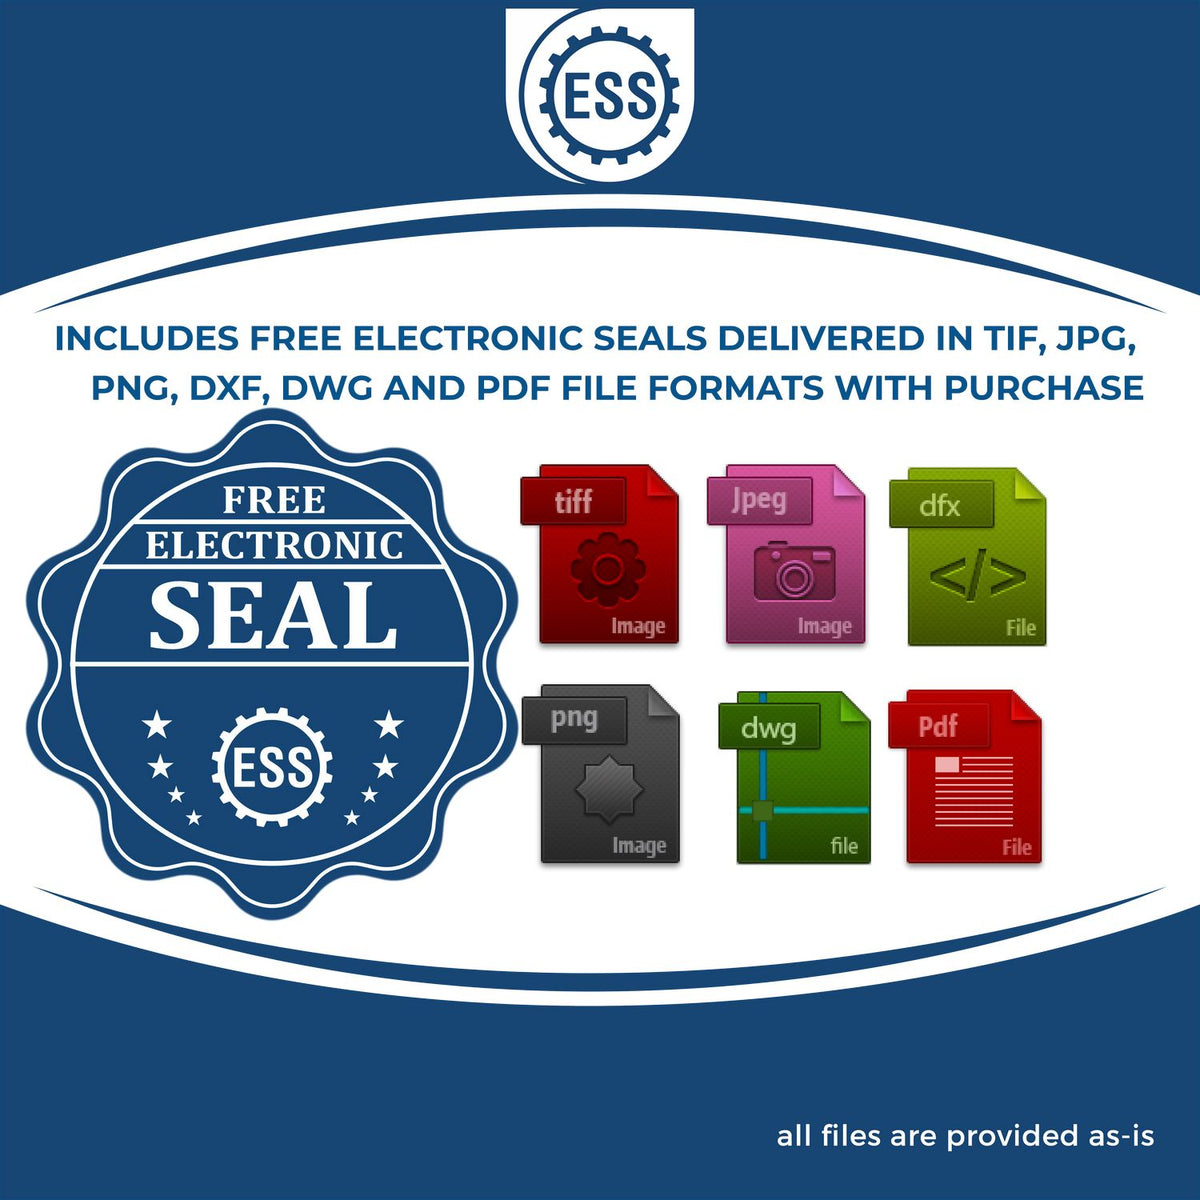 An infographic for the free electronic seal for the Gift Nevada Architect Seal illustrating the different file type icons such as DXF, DWG, TIF, JPG and PNG.